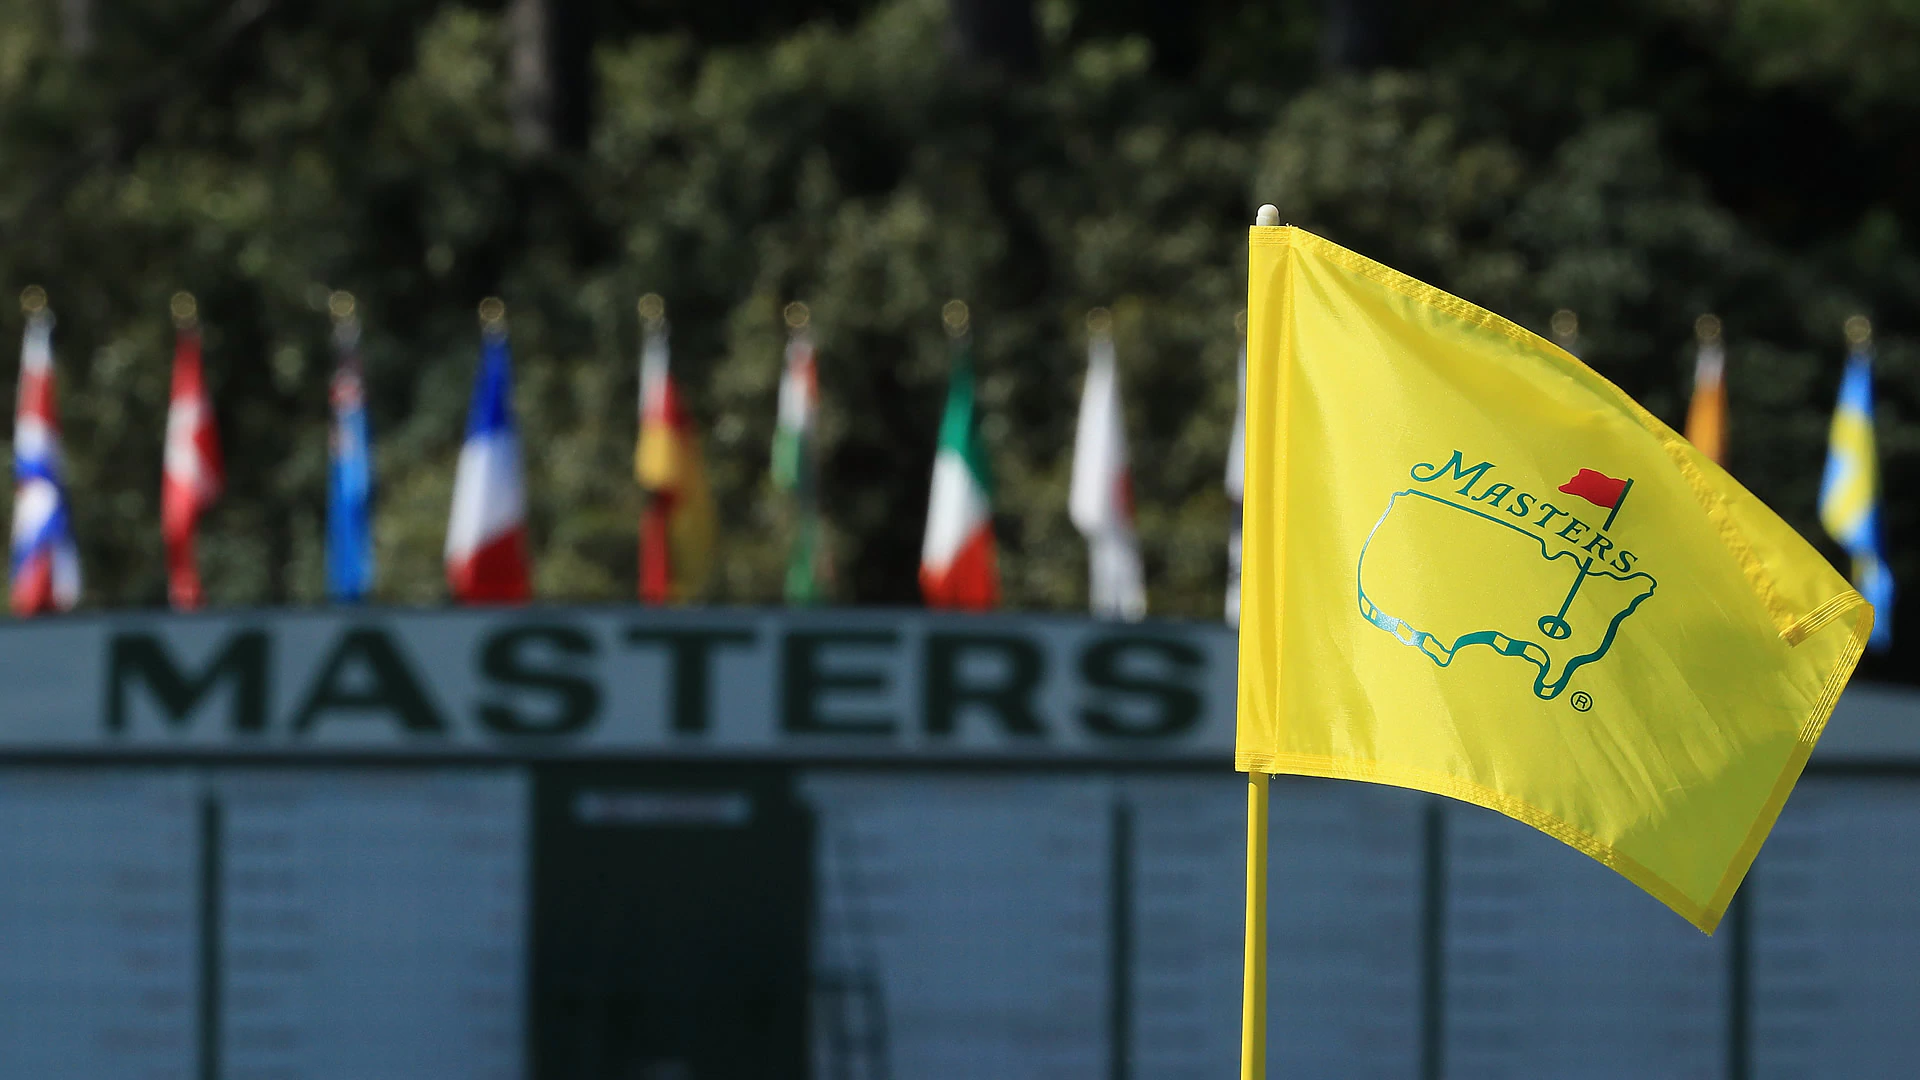 How to watch the Masters on TV and online